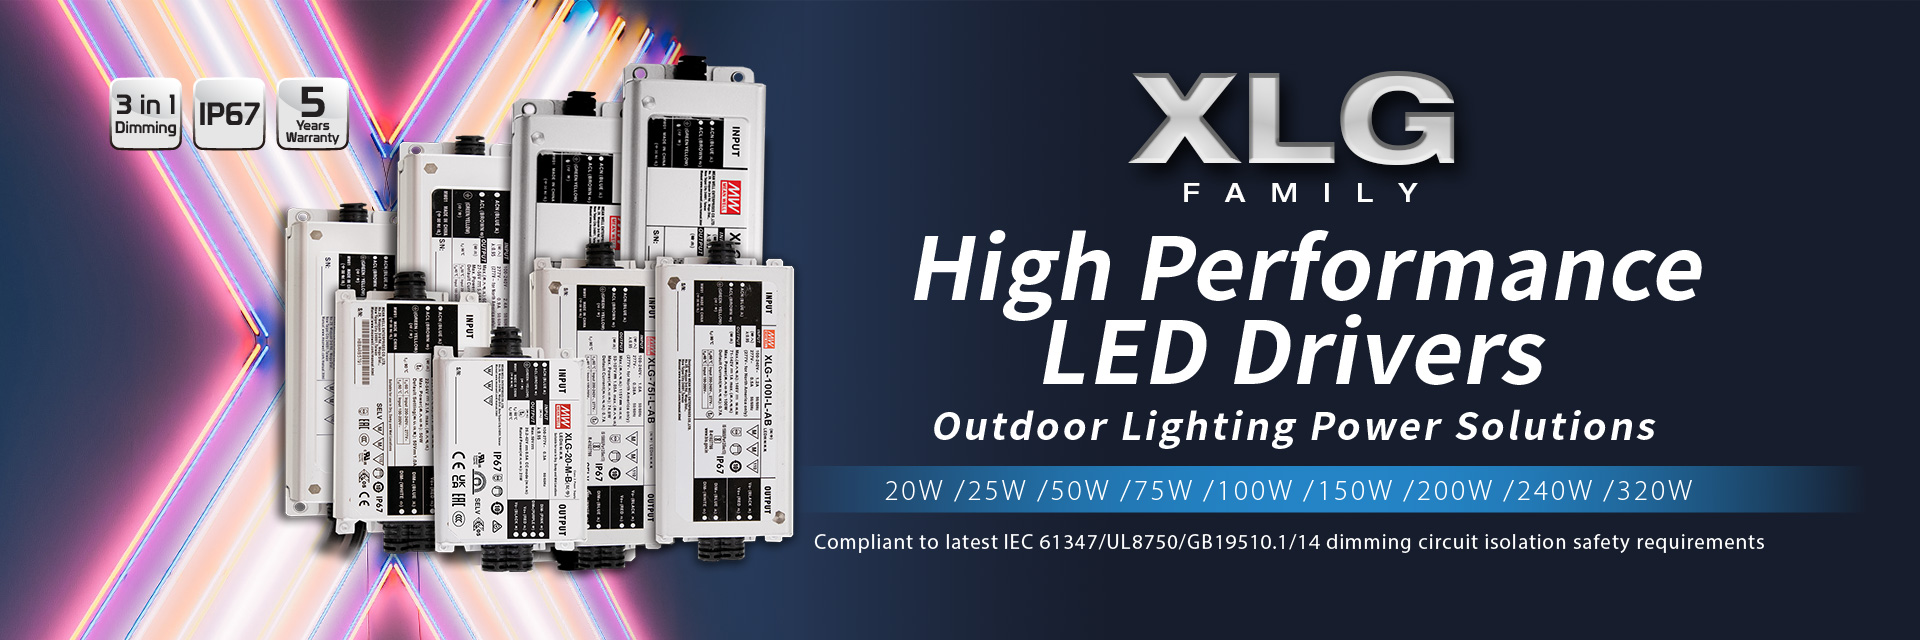 MEAN WELL XLG Series High Performance LED Drivers for outdoor Lighting Power Solution